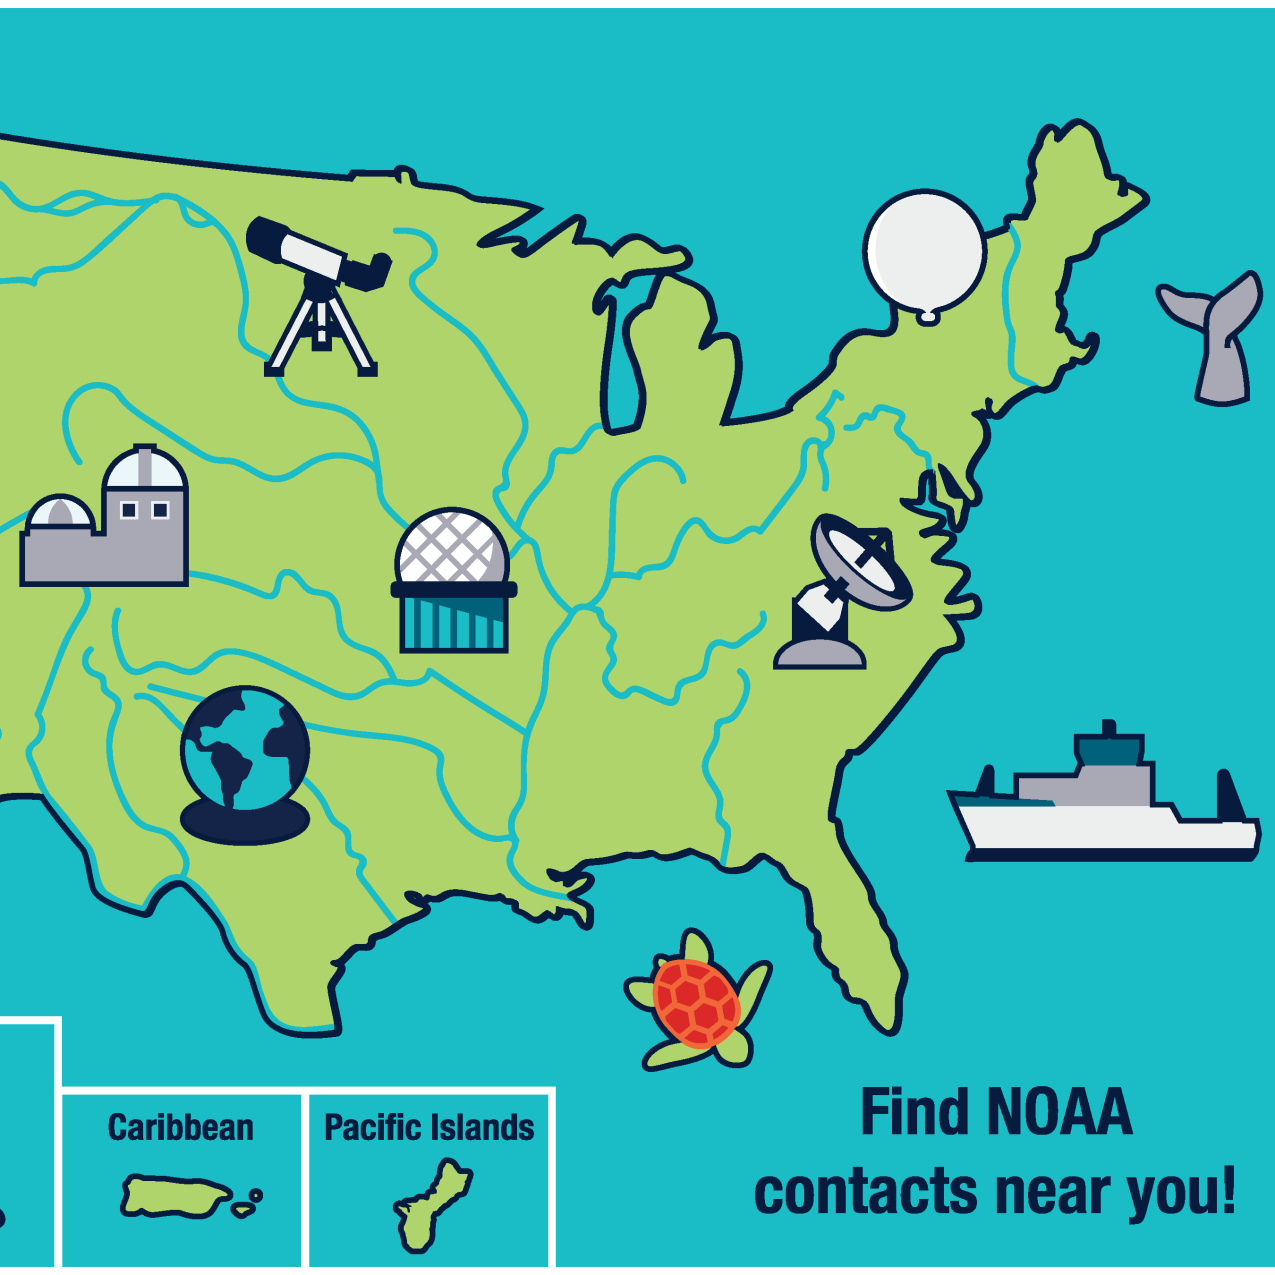 Postcard graphic with map showing NOAA-related icons including satellites, research vessels, fisheries, Science on a Sphere, and more symbolizing NOAA facilities and professional communicators across all 50 United States, Washington, D.C., and the U.S. territories. Find NOAA contacts near you at https://www.noaa.gov/education/noaa-in-your-backyard.